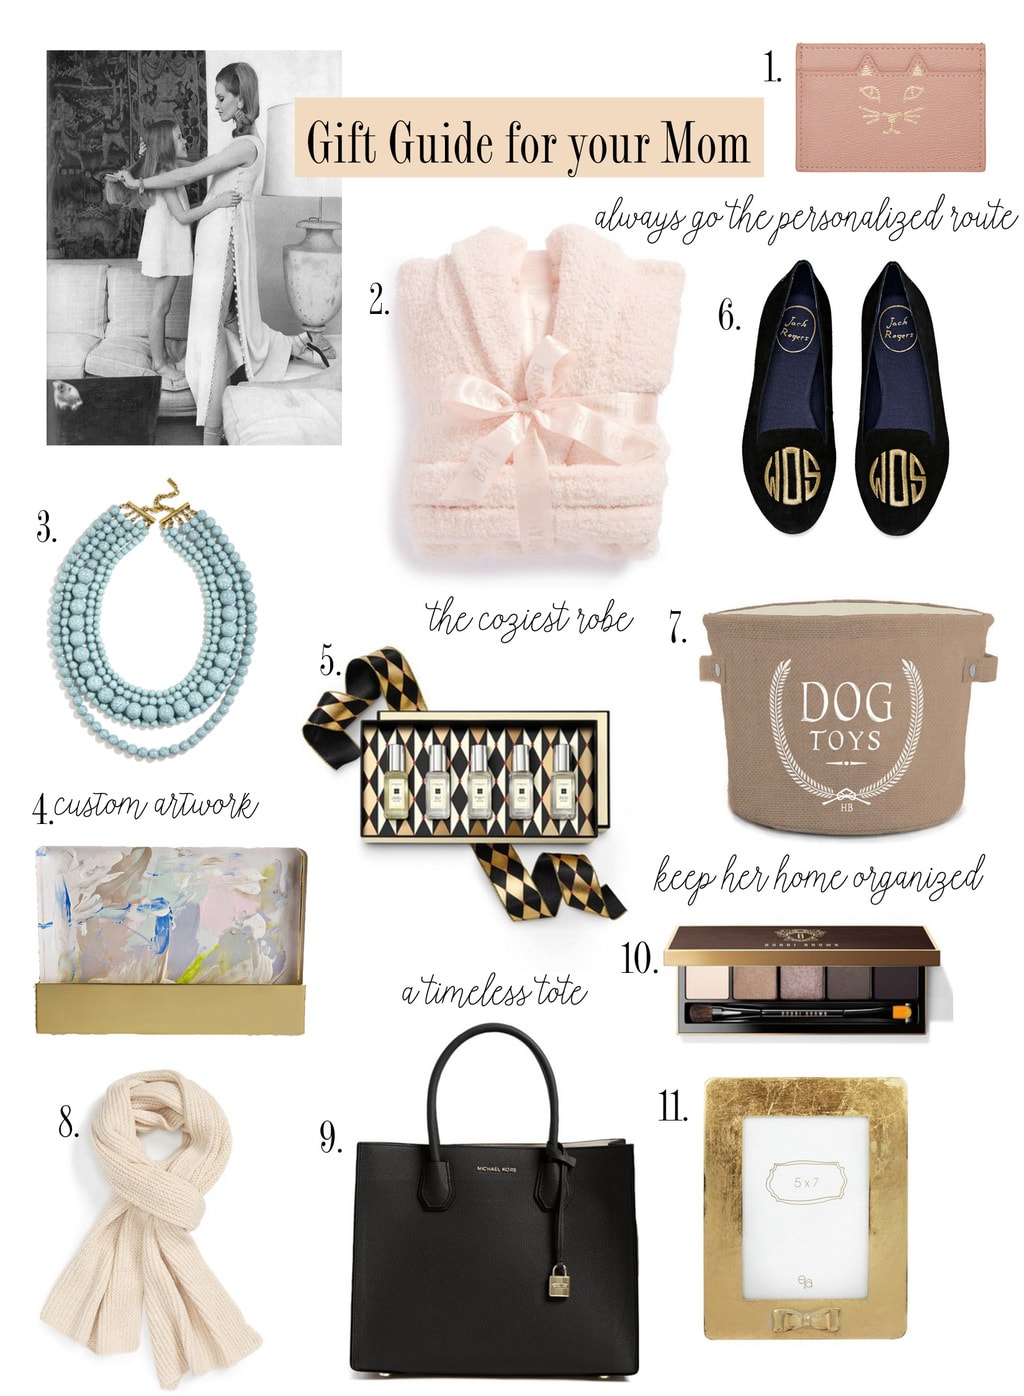 Gift Guide For Your Mom  Chronicles of Frivolity